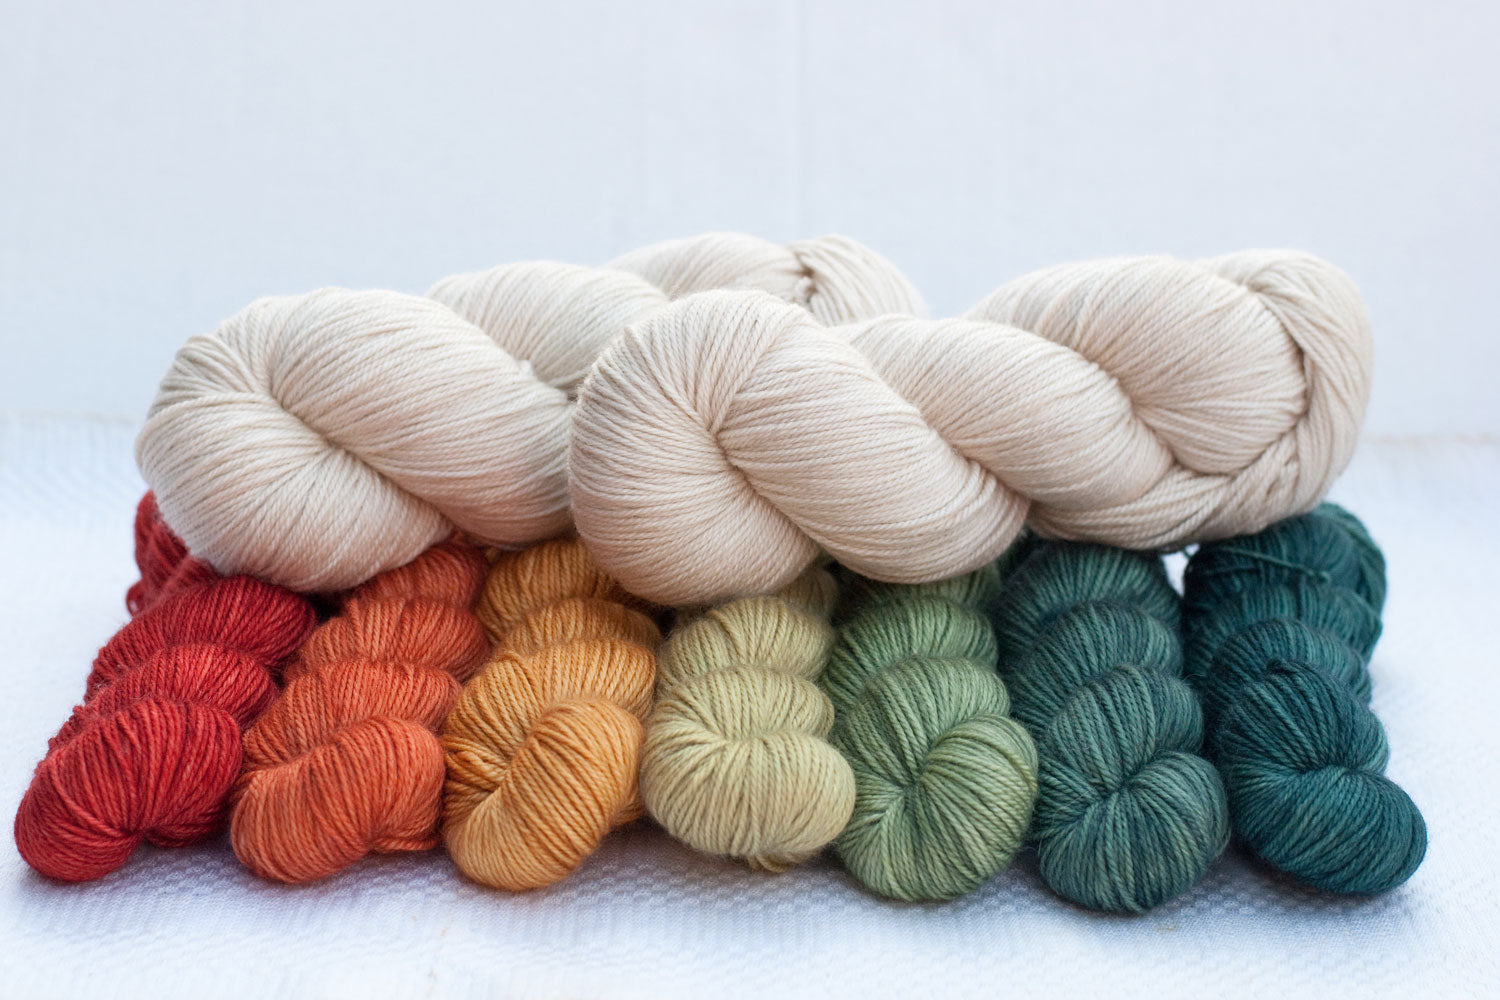 two full skeins of cream yarn arranged on top of seven gradient skeins from red-orange through yellow to green